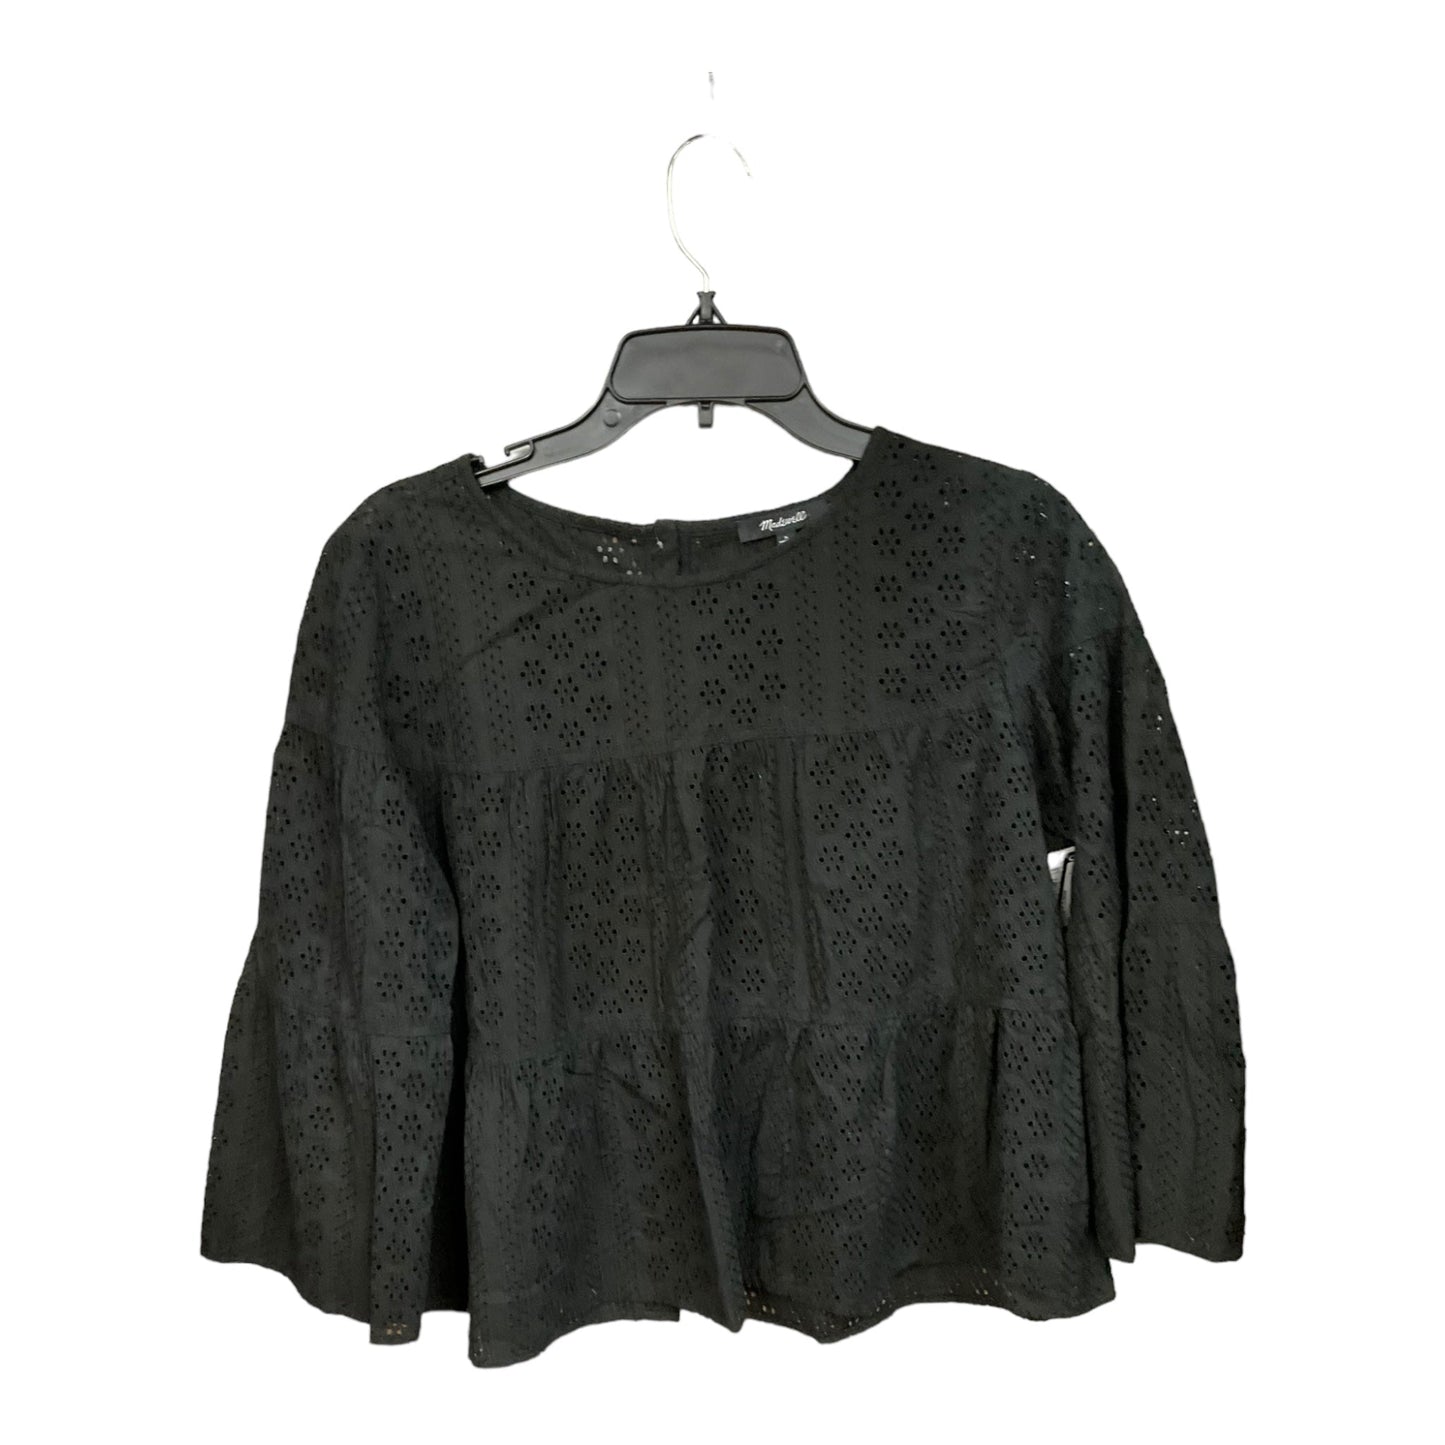 Black Top 3/4 Sleeve Madewell, Size L